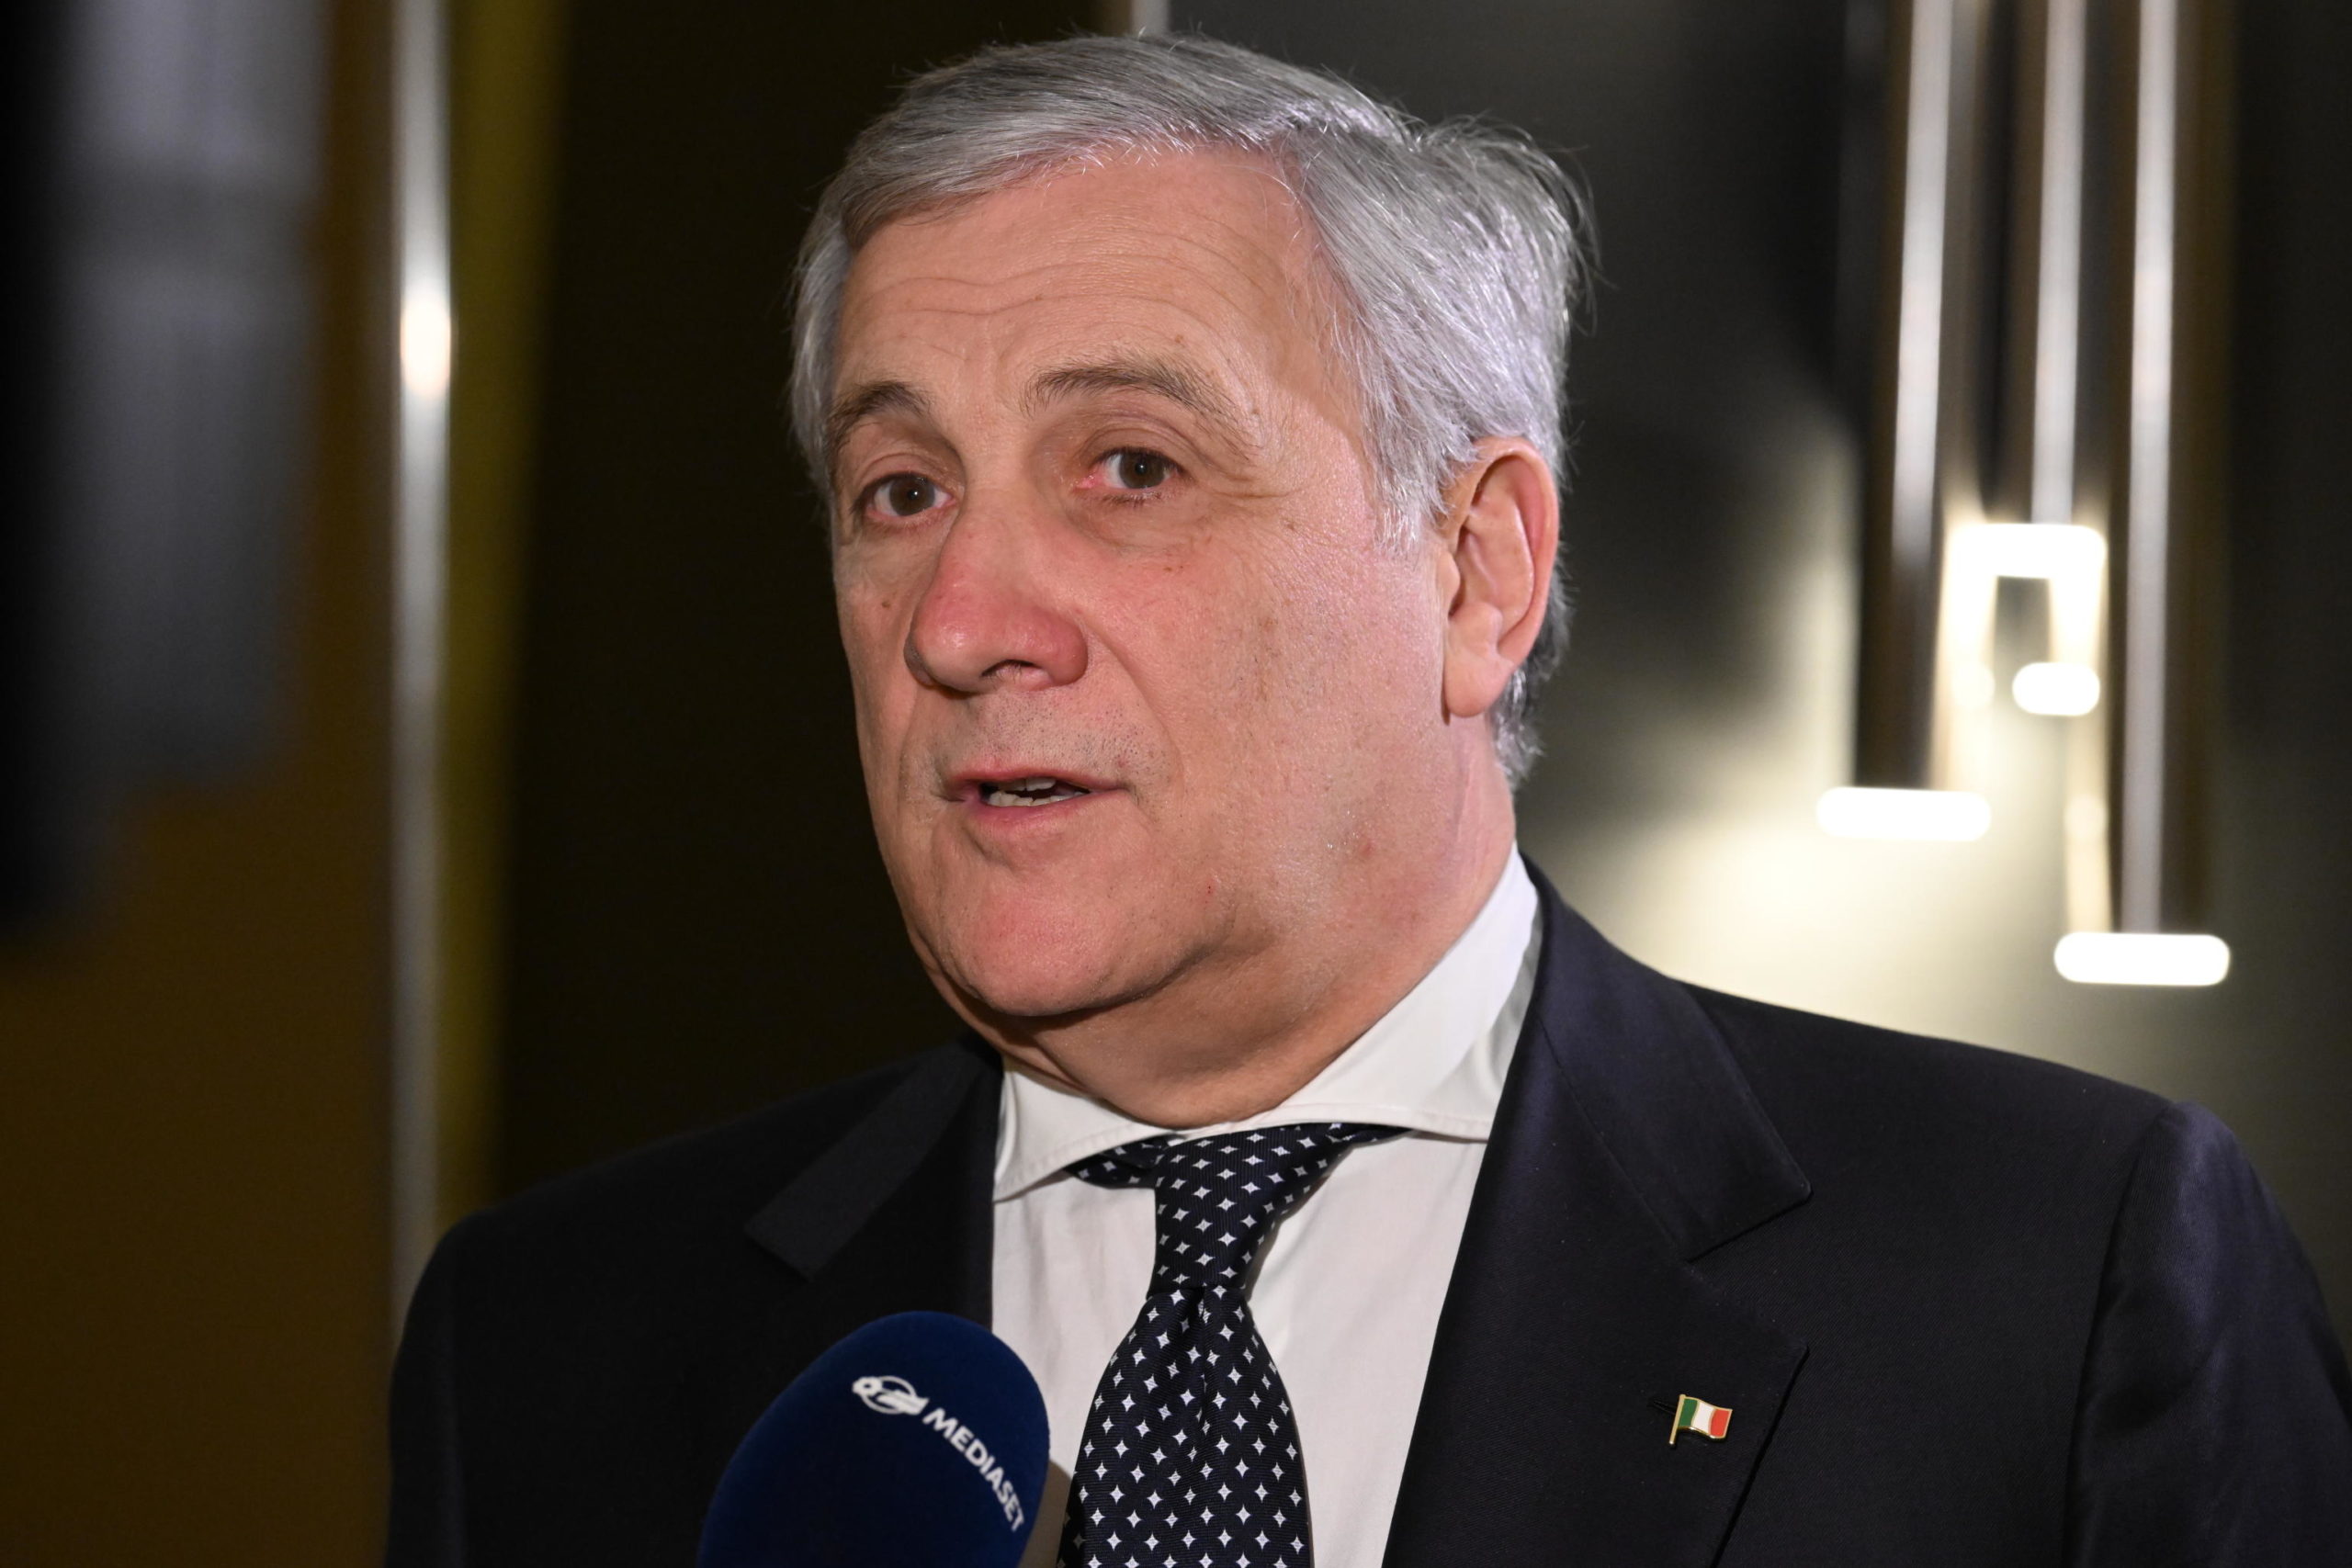 Italy's Minister for Foreign Affairs, Antonio Tajani, talks to the Media on occasion of the 